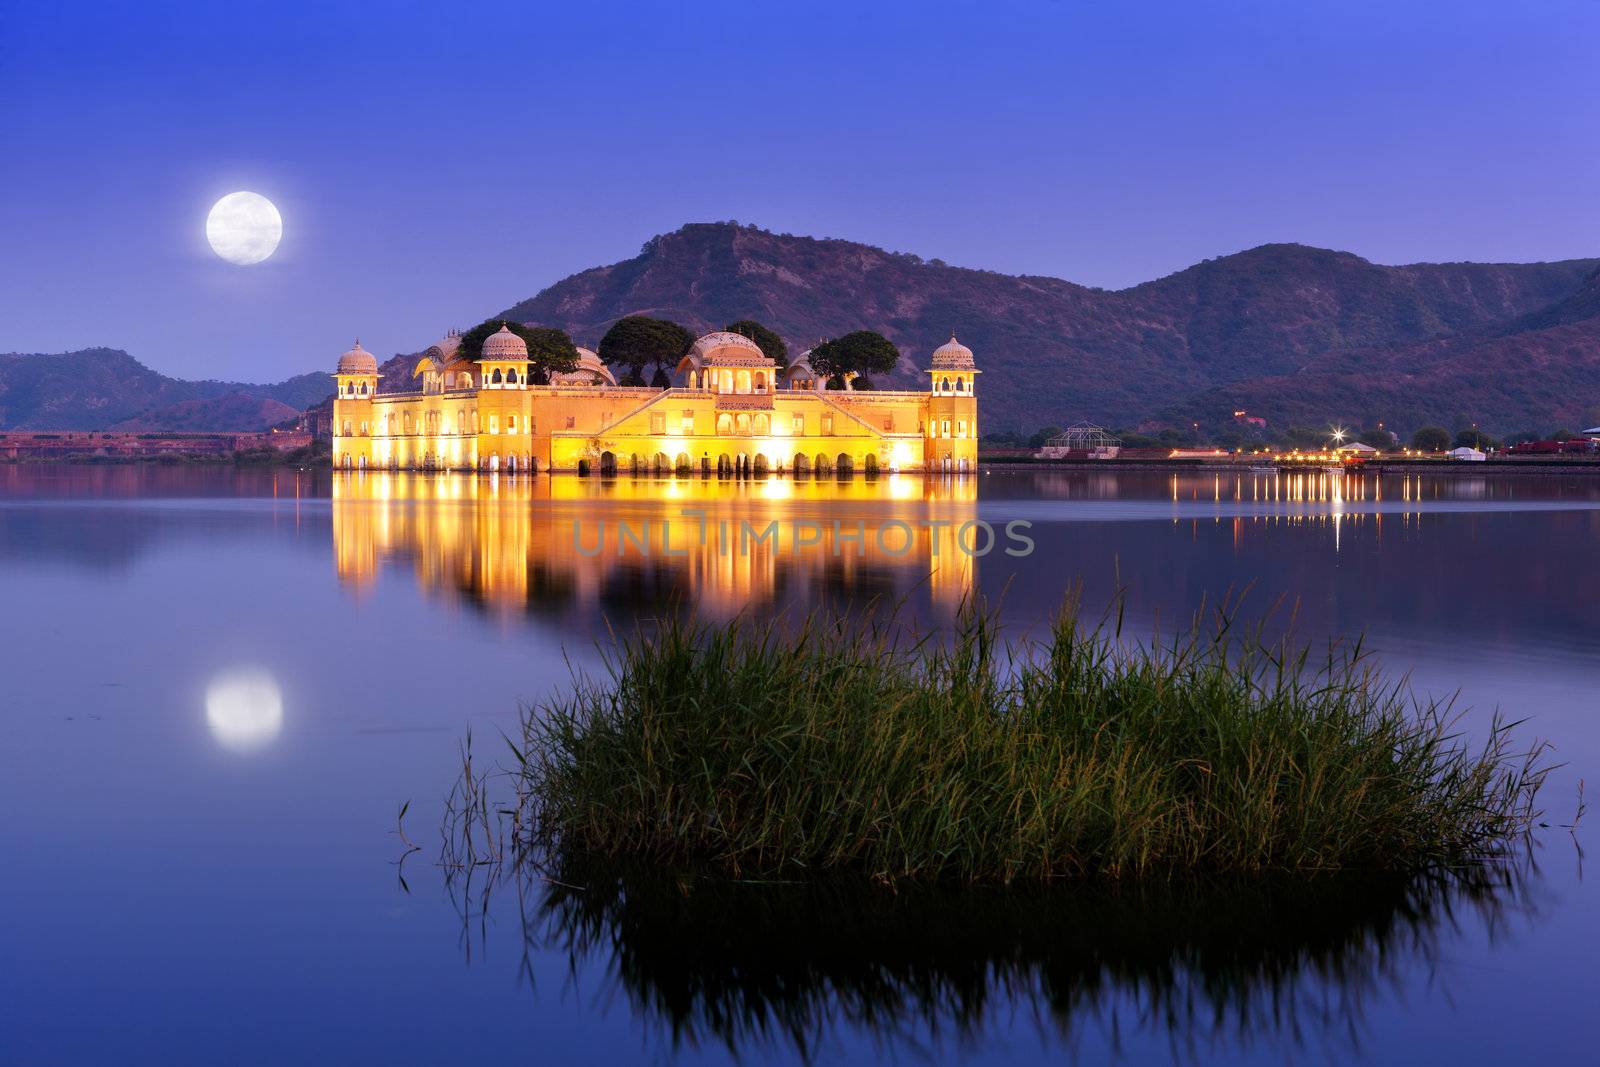 The palace Jal Mahal at night.  Jal Mahal (Water Palace) was built during the 18th century in the middle of Man Sager Lake.  Jaipur, Rajasthan, India.